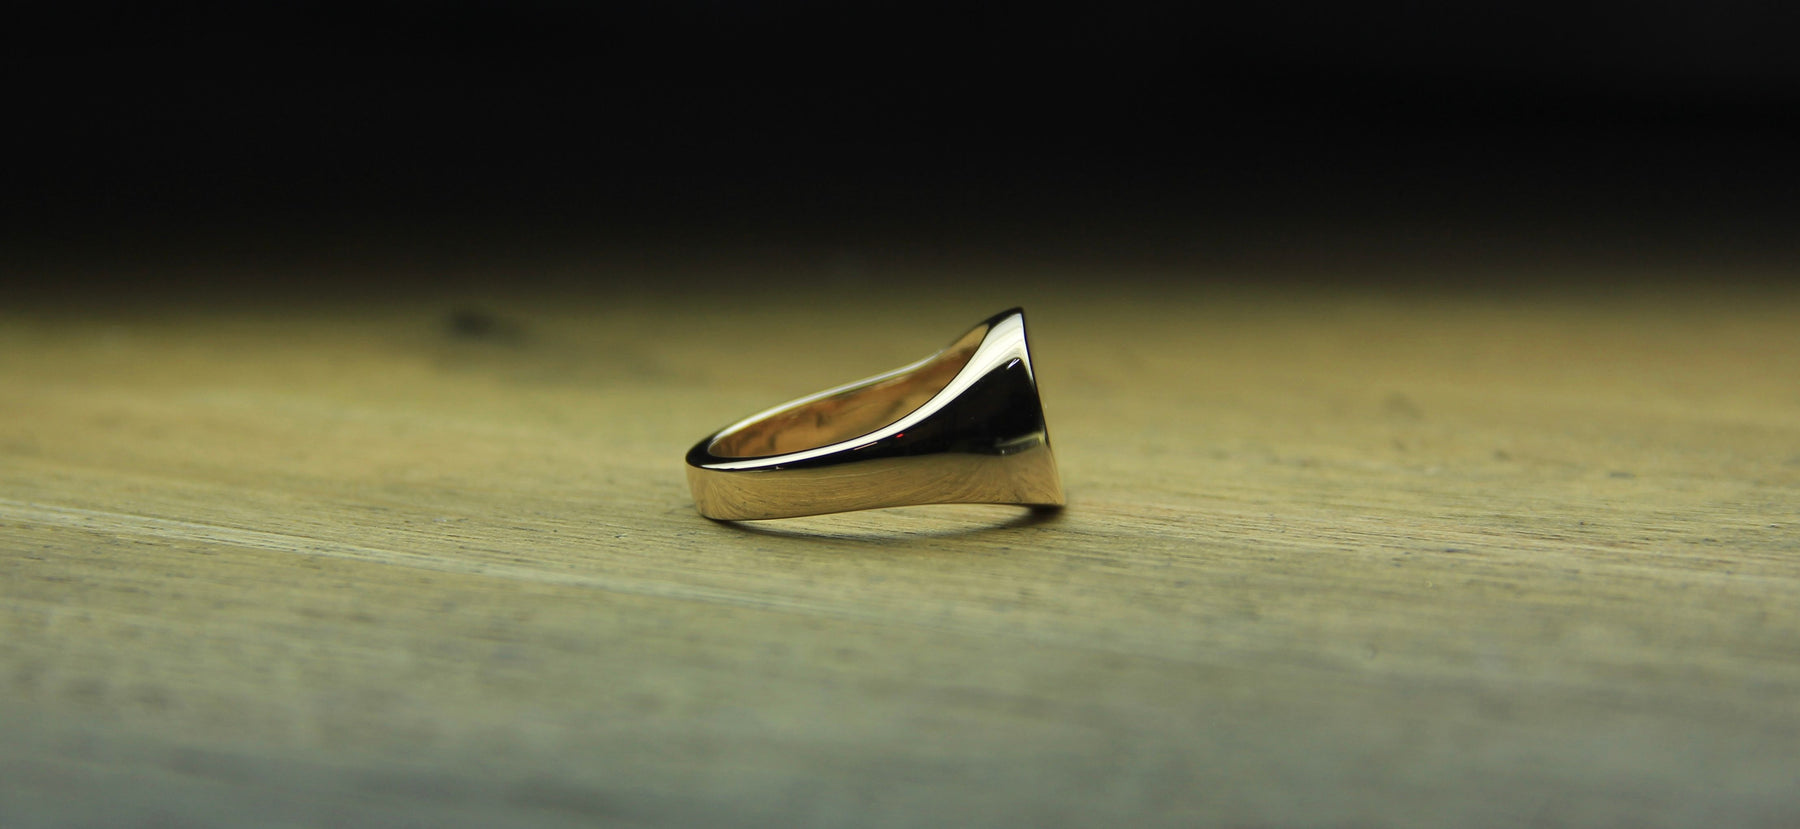 9ct Yellow Gold Signet Ring - Boutee